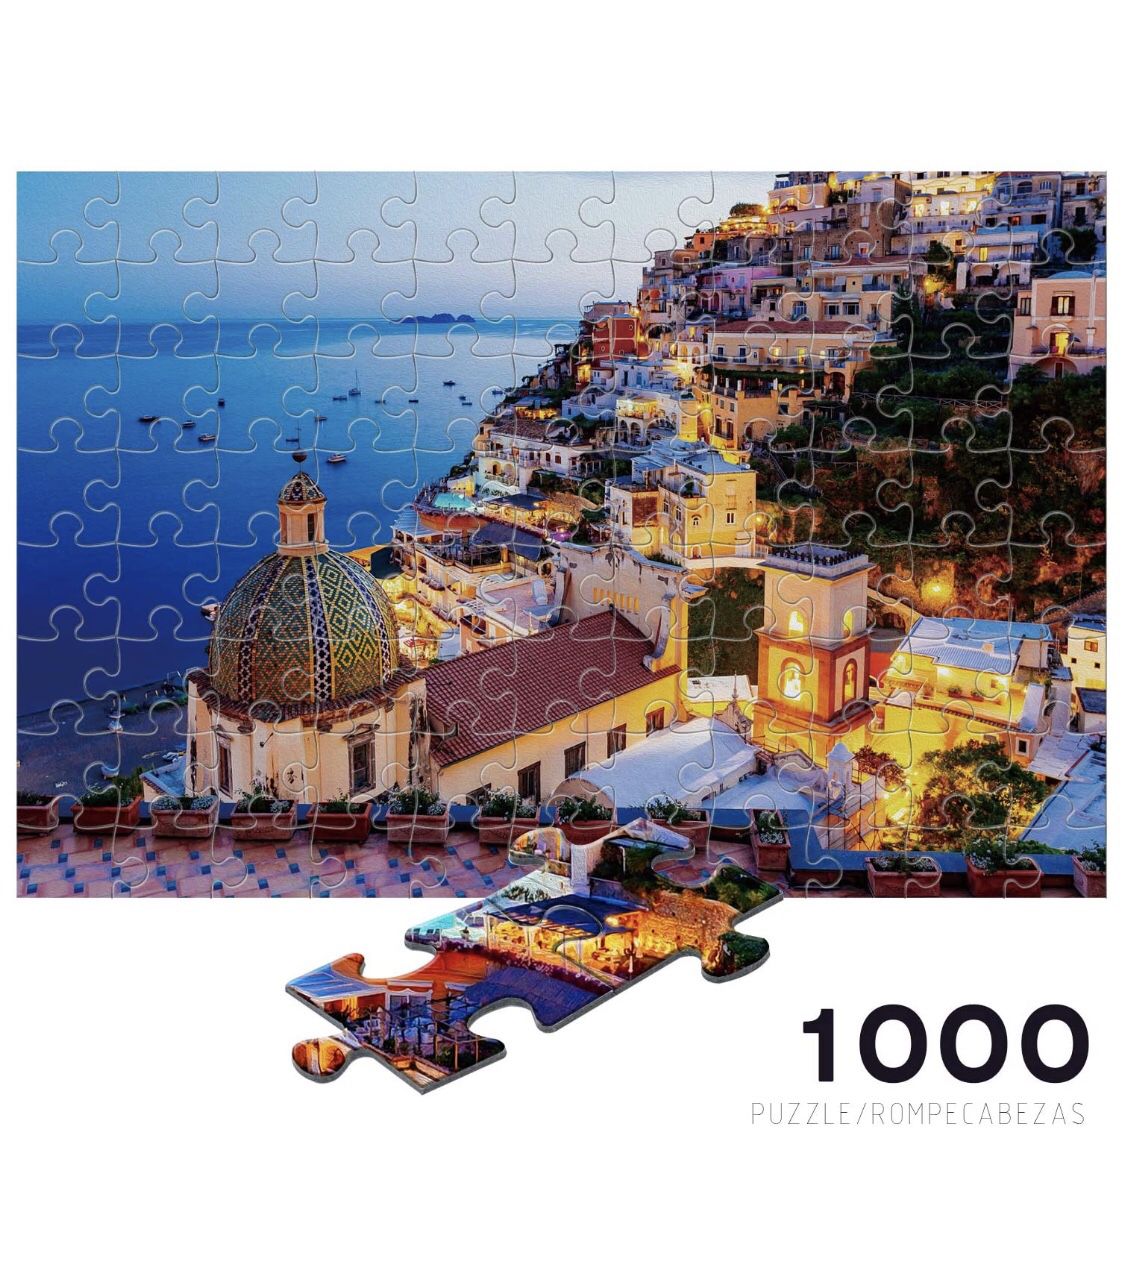 Brand new! Jigsaw Puzzles 1000 Pieces-Amalfi Coast Large Puzzle 1000 Toys-Intellectual Educational Games for Adults Teens Kids Children